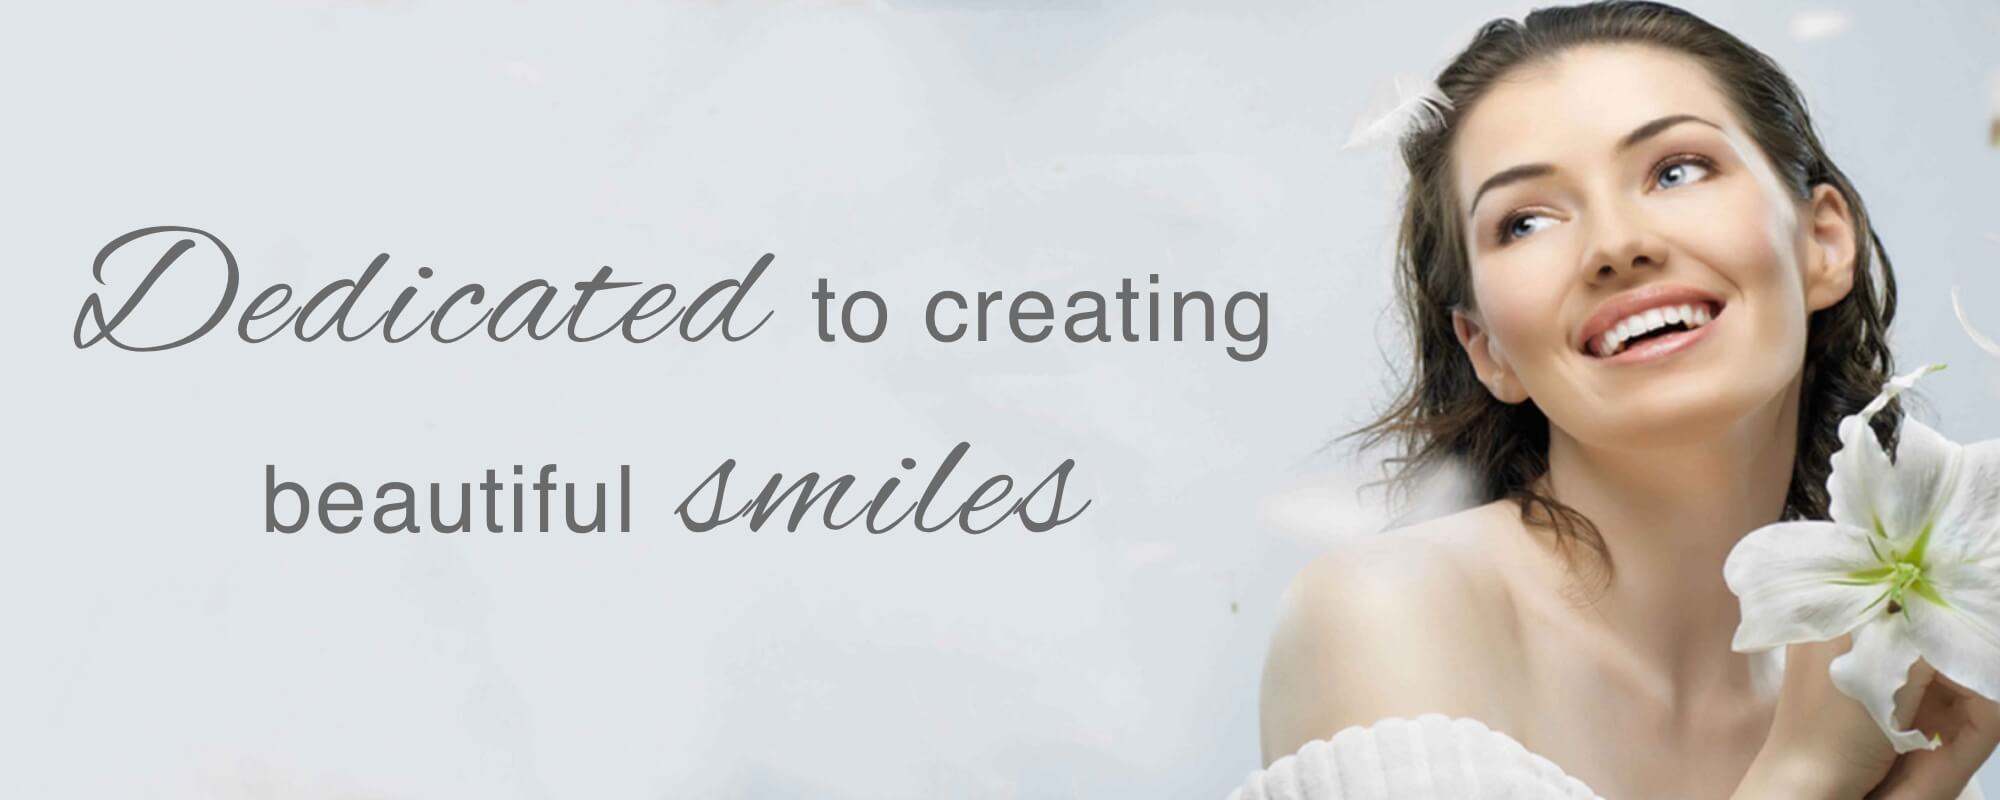 beautiful smiles with cosmetic dentistry